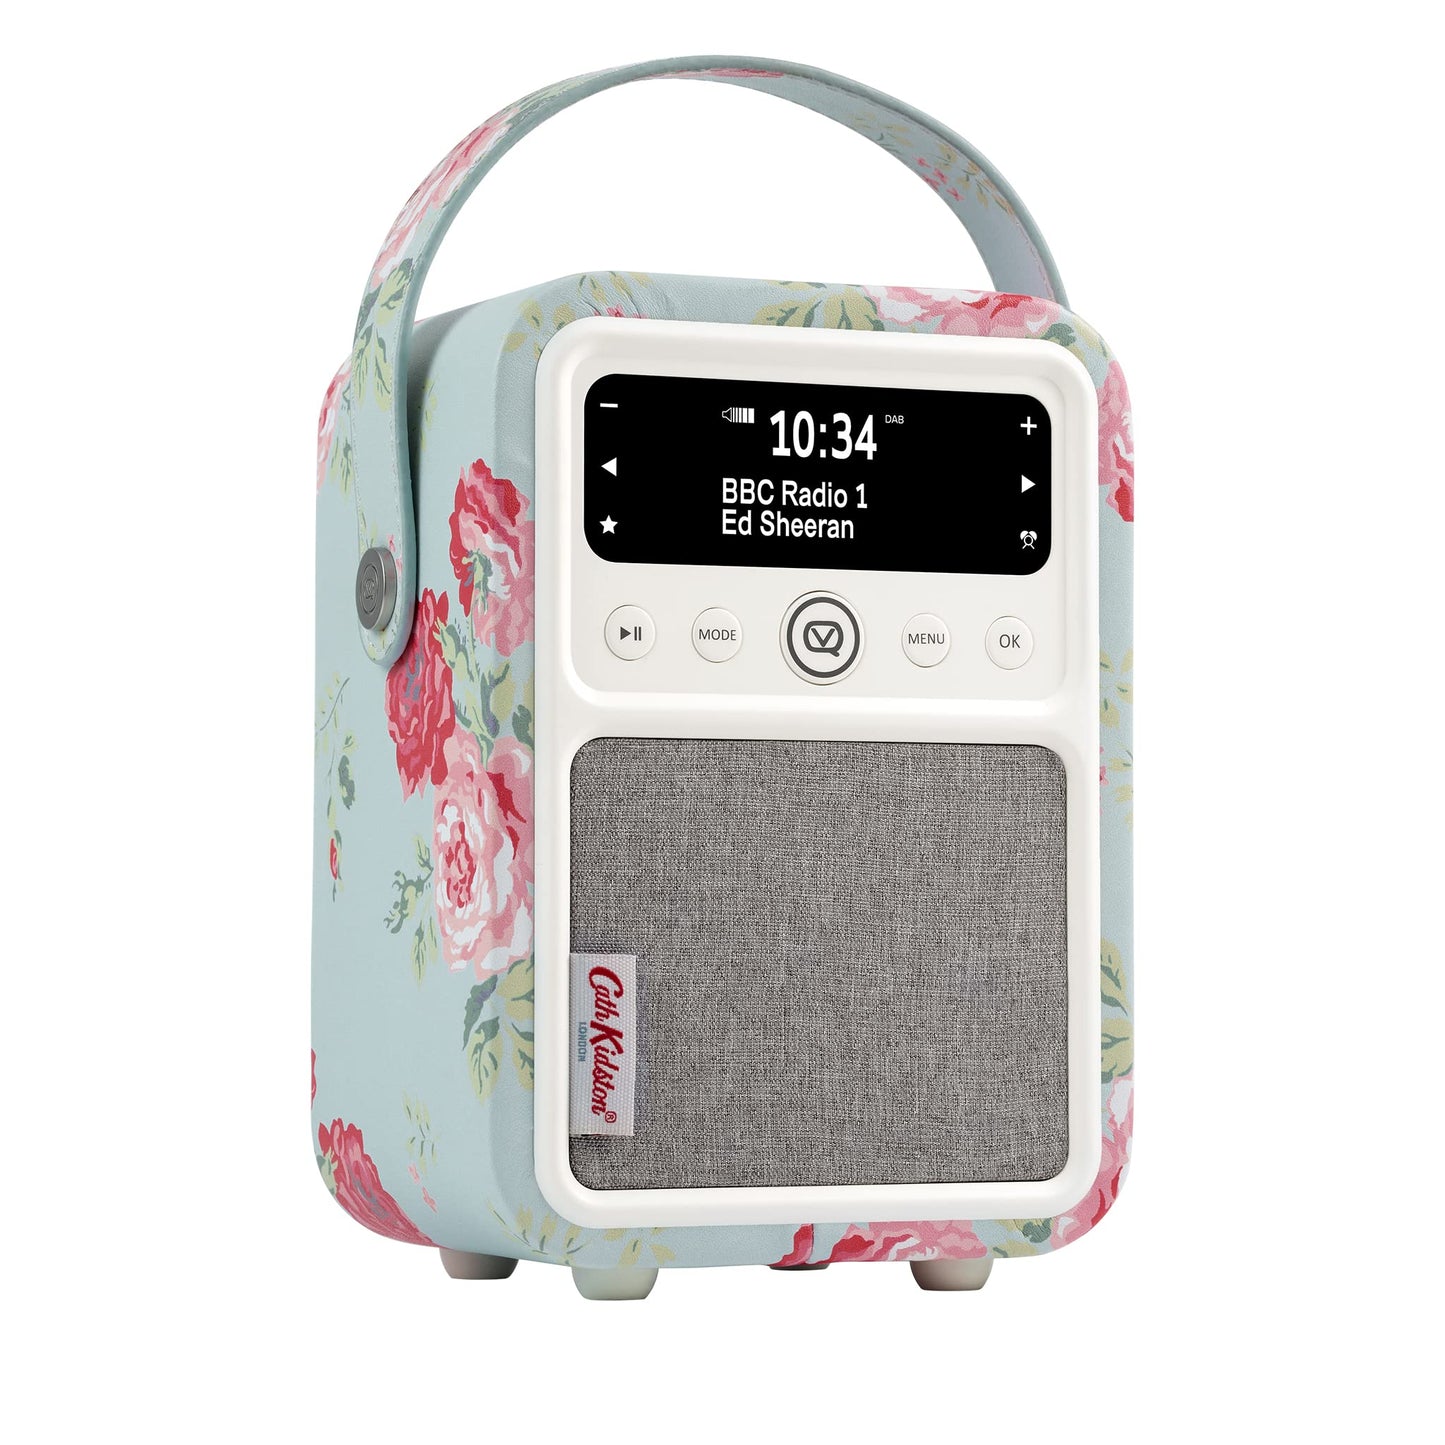 VQ Monty Portable DAB+/FM Bluetooth Radio - Cath Kidston FREE Rechargeable Battery Worth £25   FREE UK Delivery